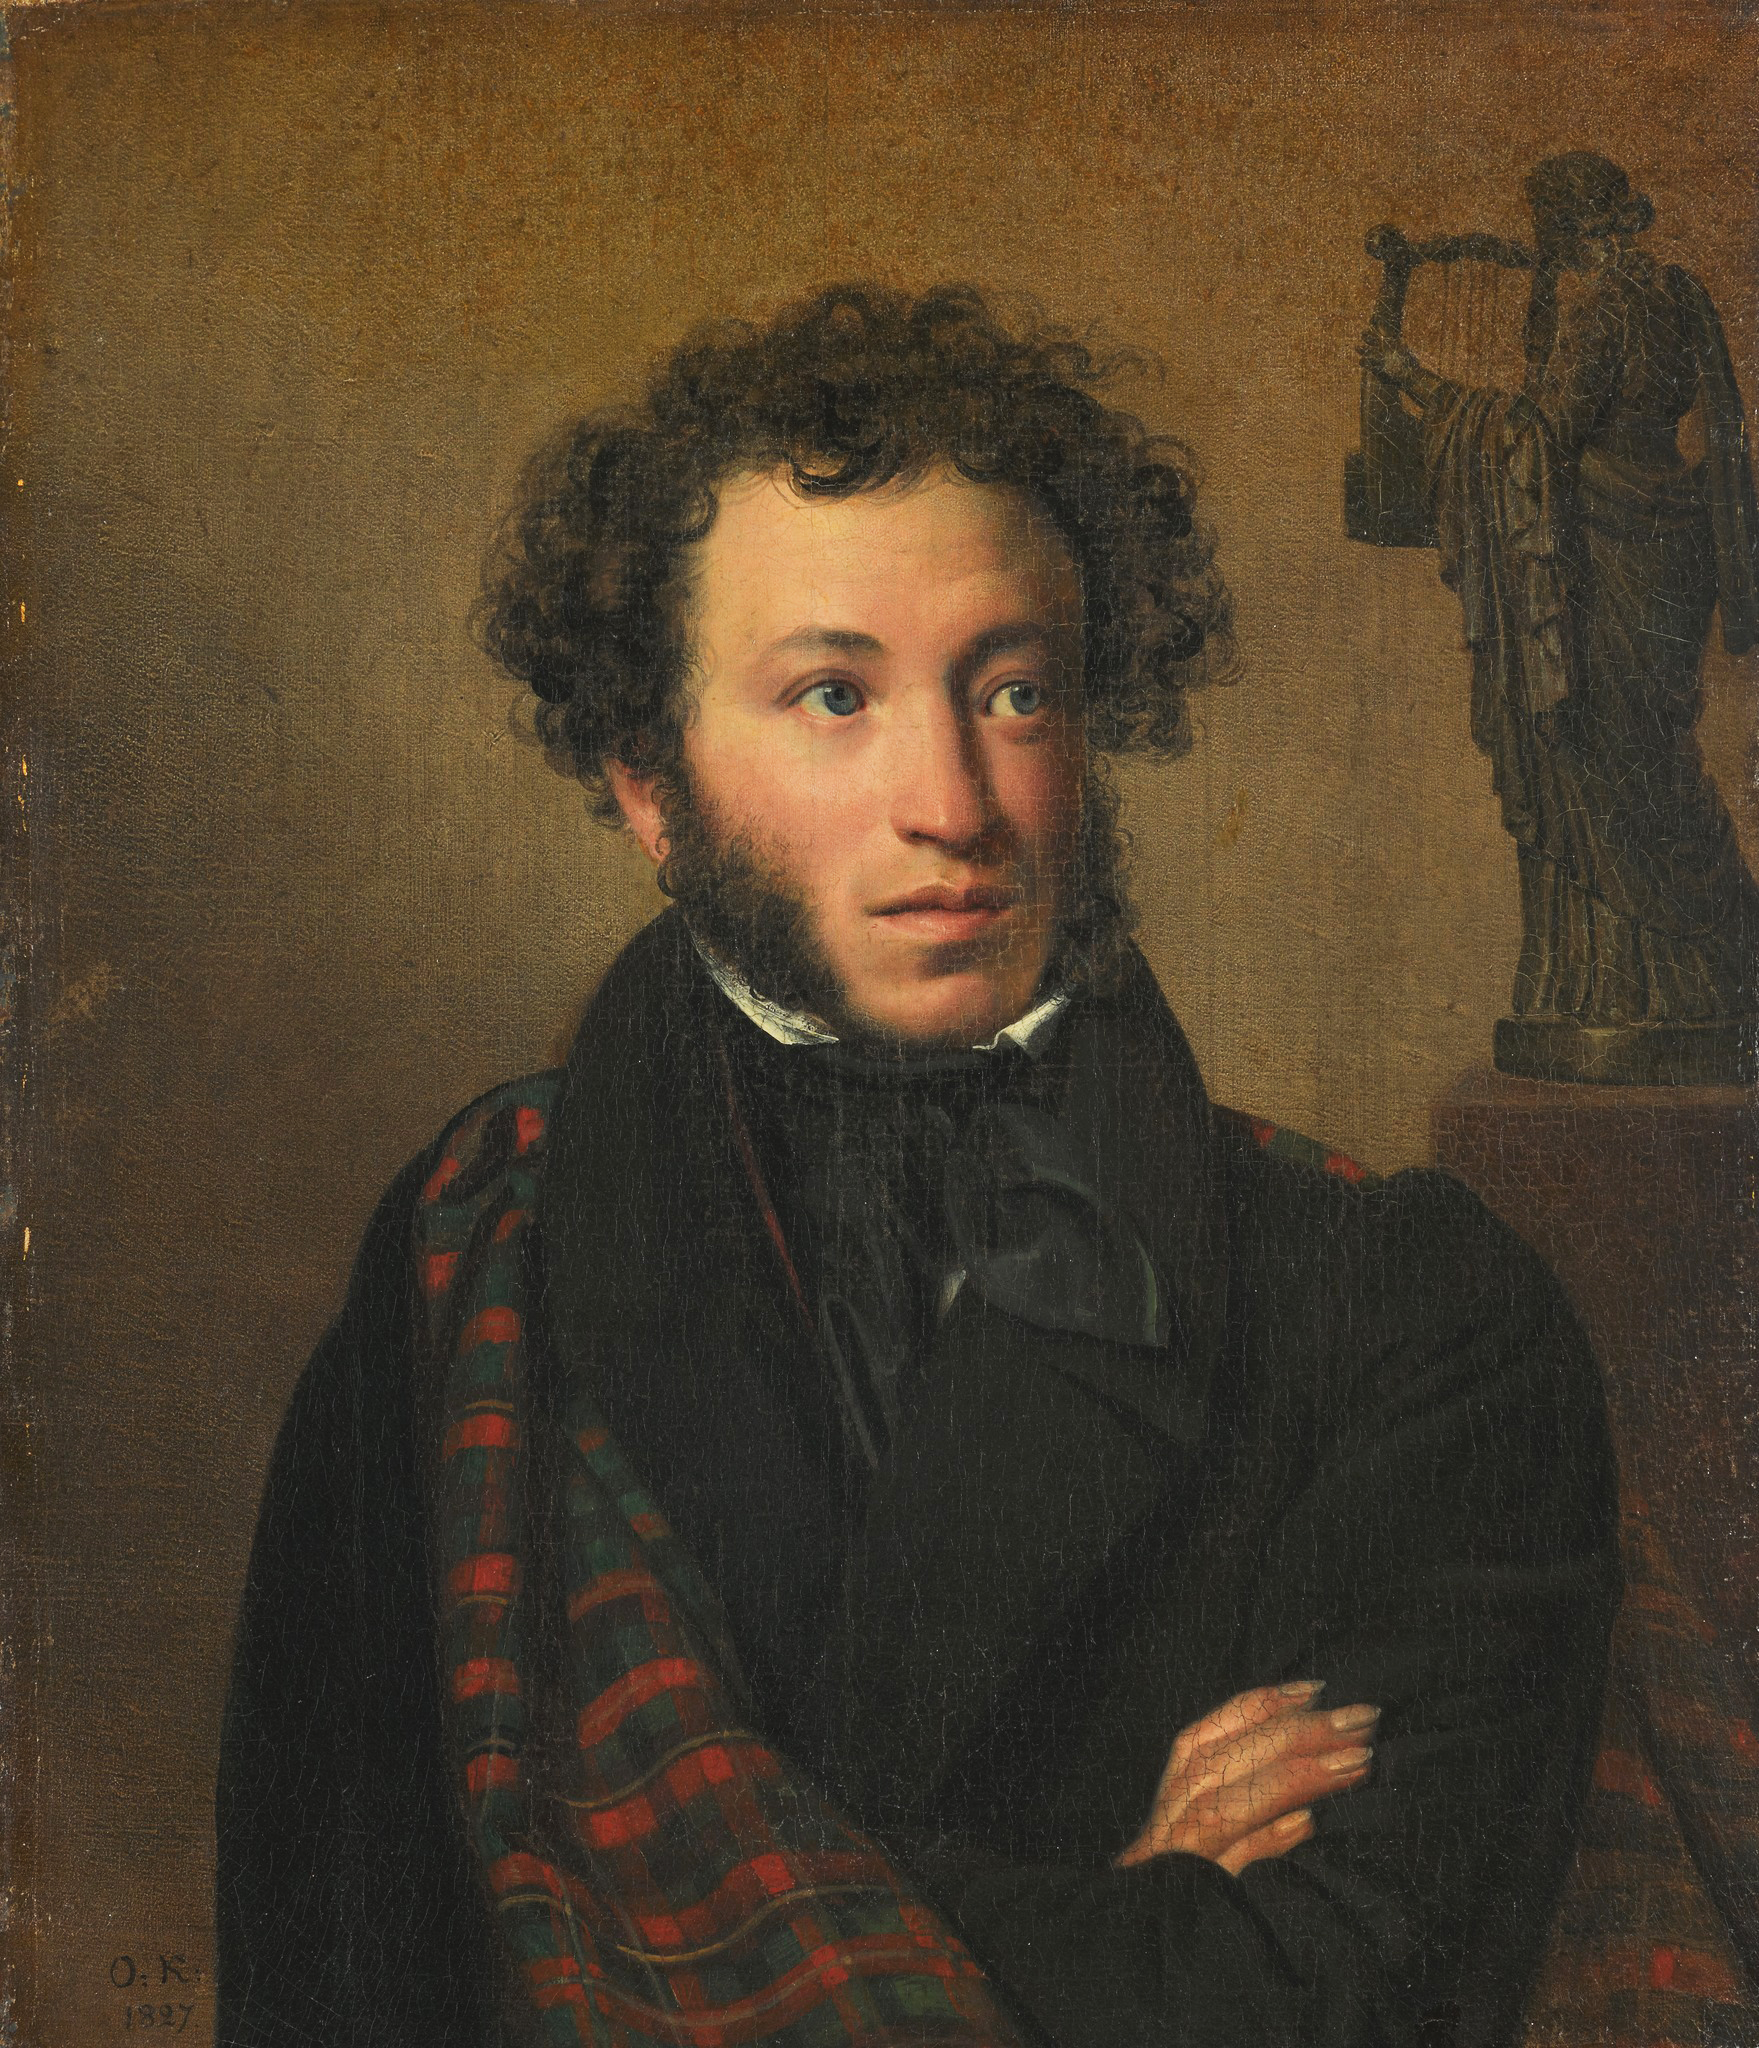 An image of the romantic poet, playwright and novelist Alexander Pushkin